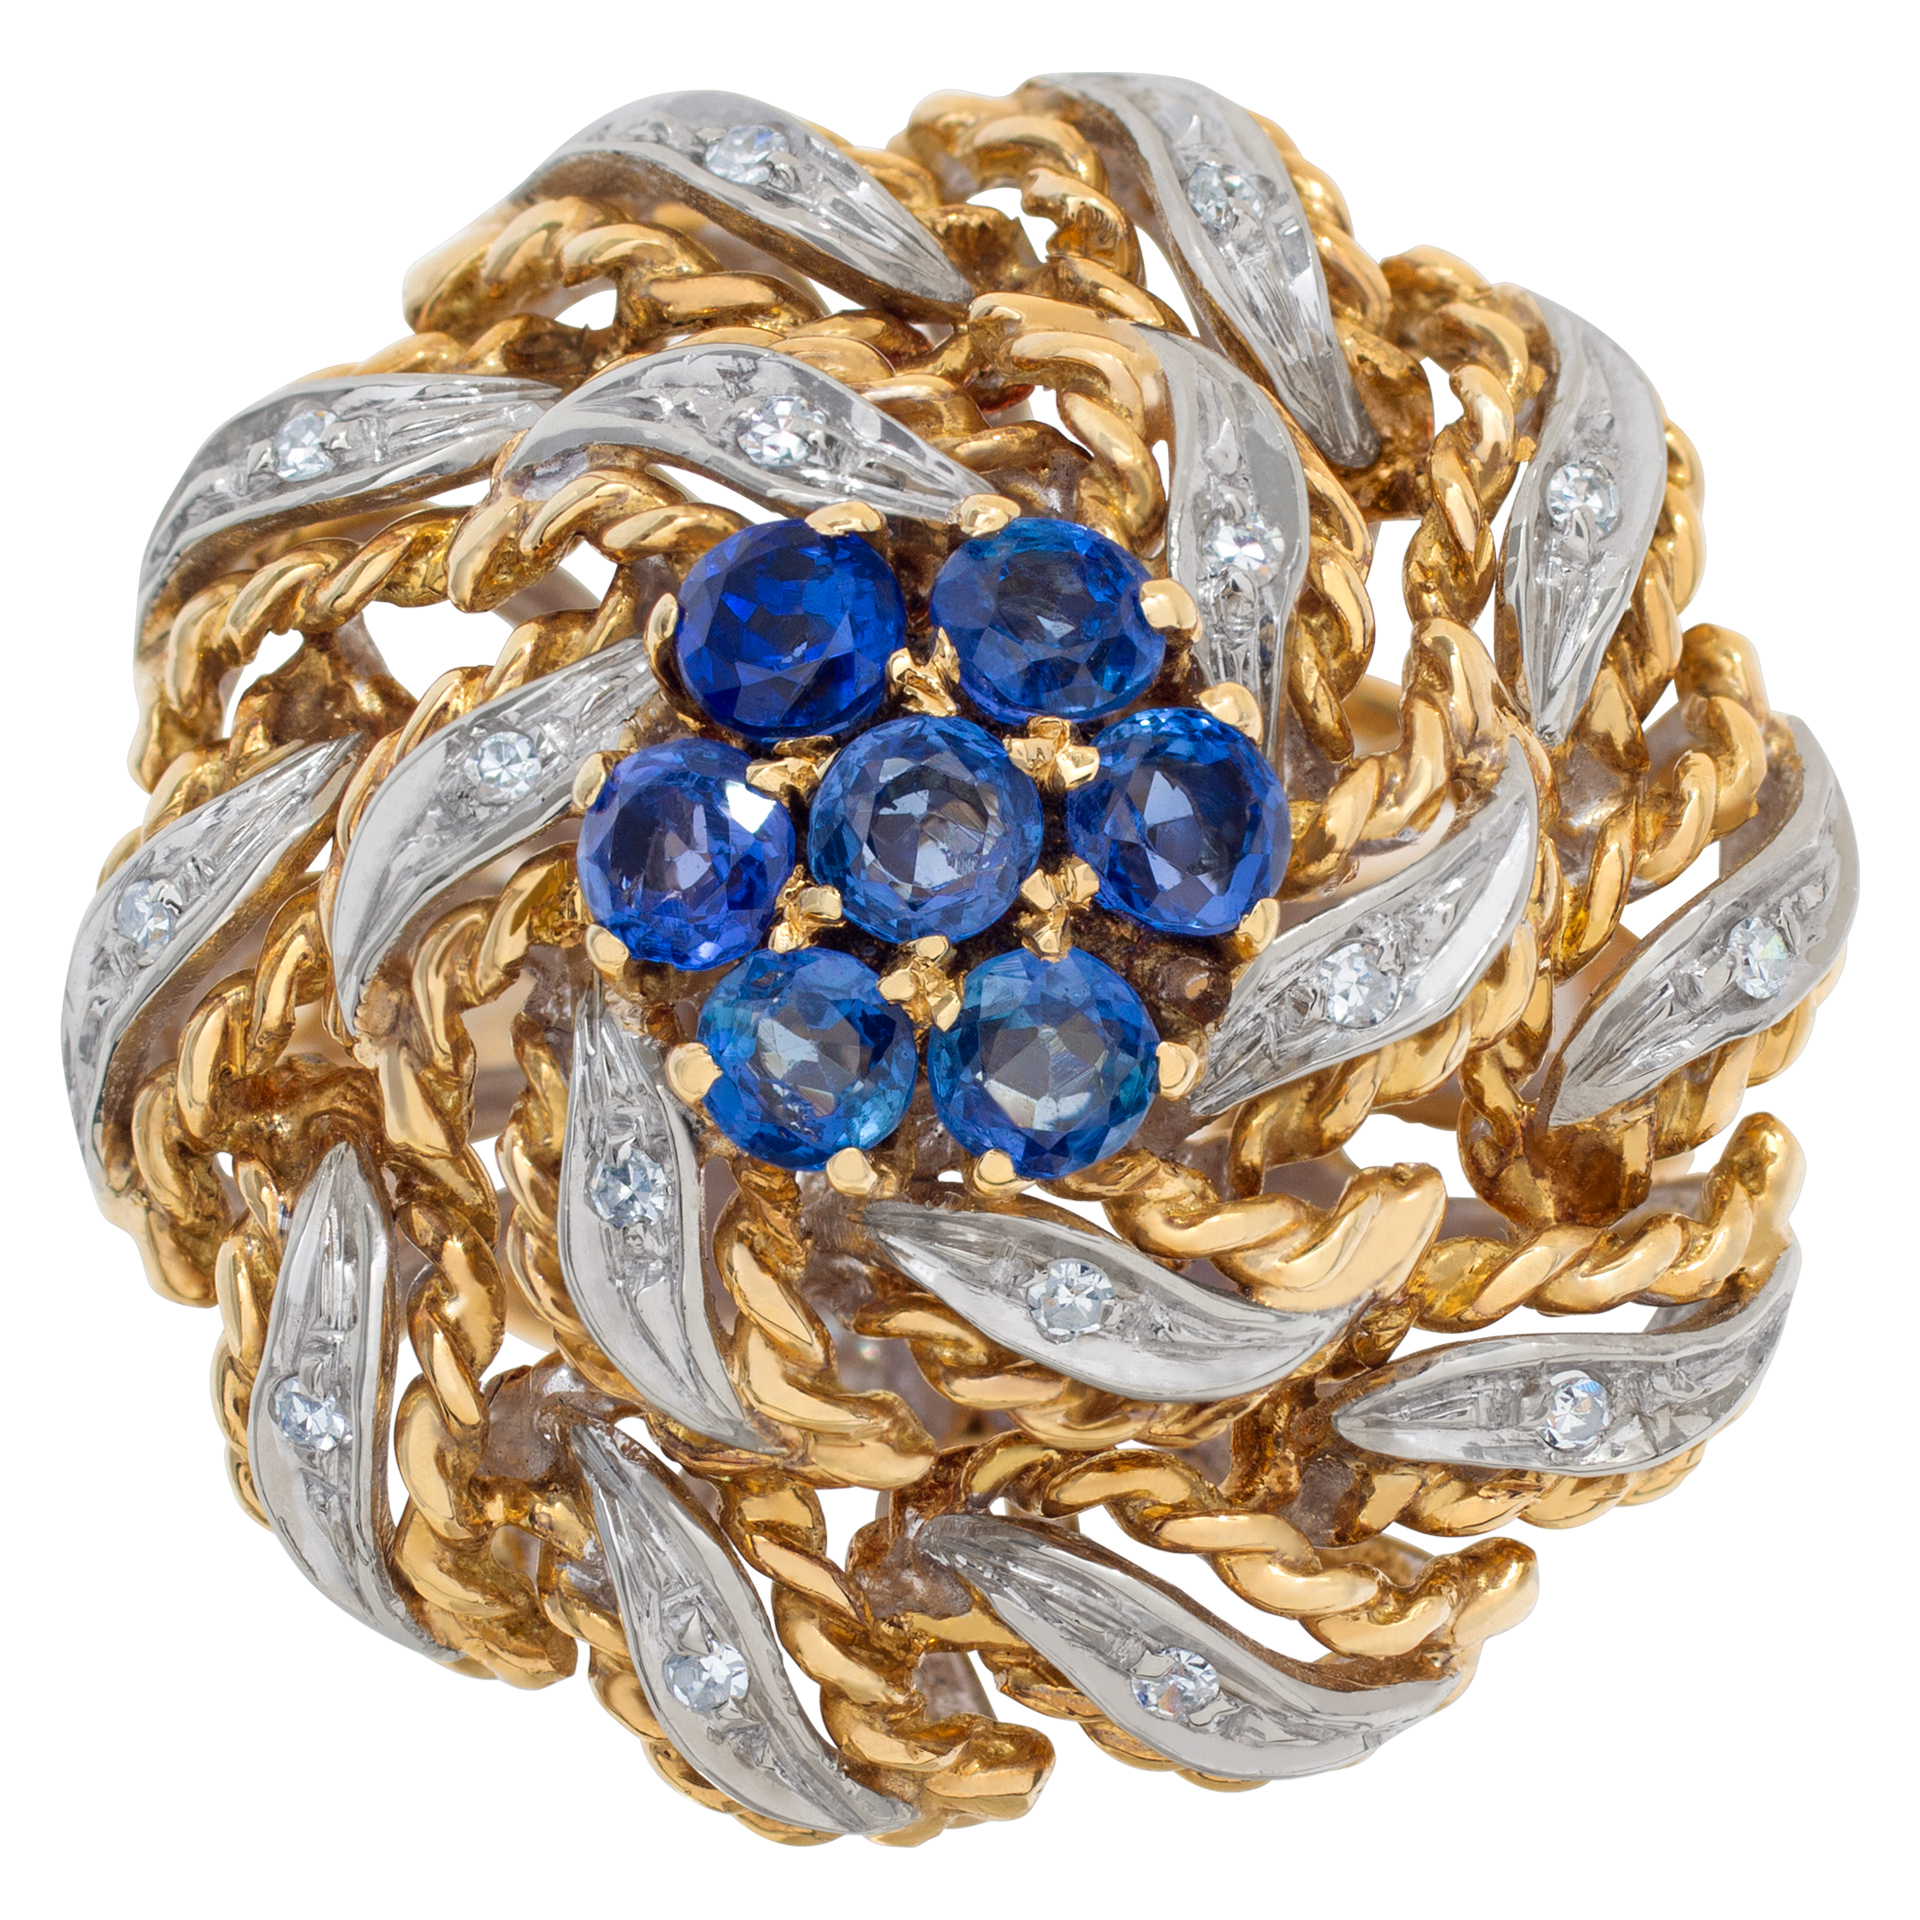 VIntage circa 1980's, Diamonds & Sapphire cocktail ring set in 18k white and yellow gold. image 2